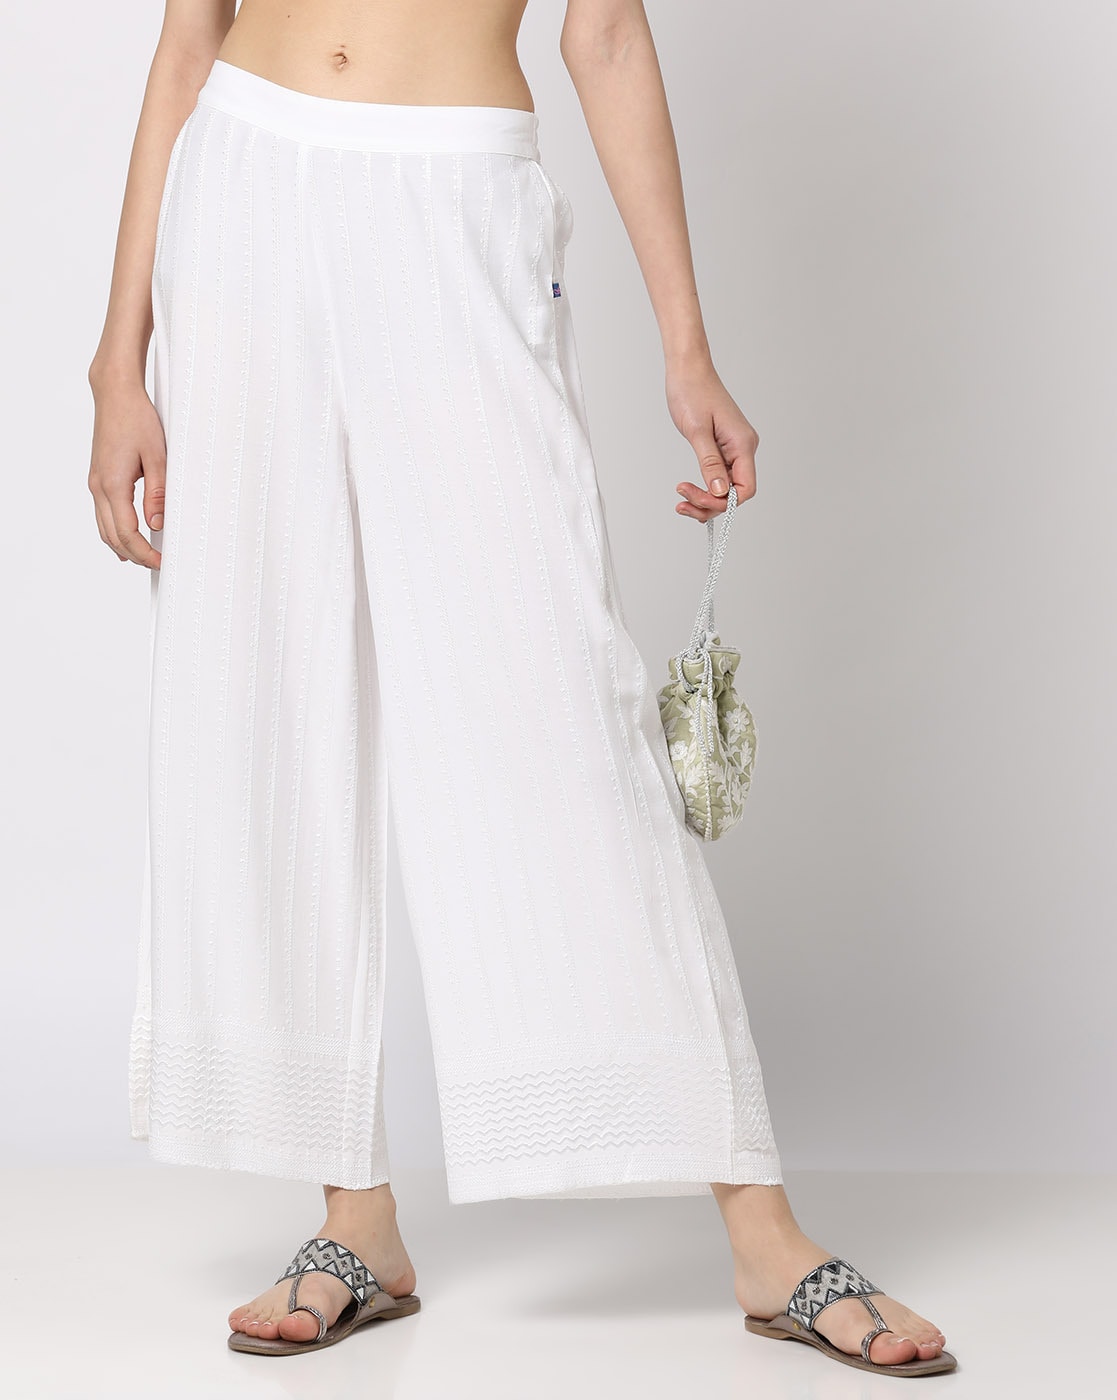 Buy Chic Attire Womens Cotton Solid Palazzo Pants Color OffWhite Size 2XL  at Amazonin